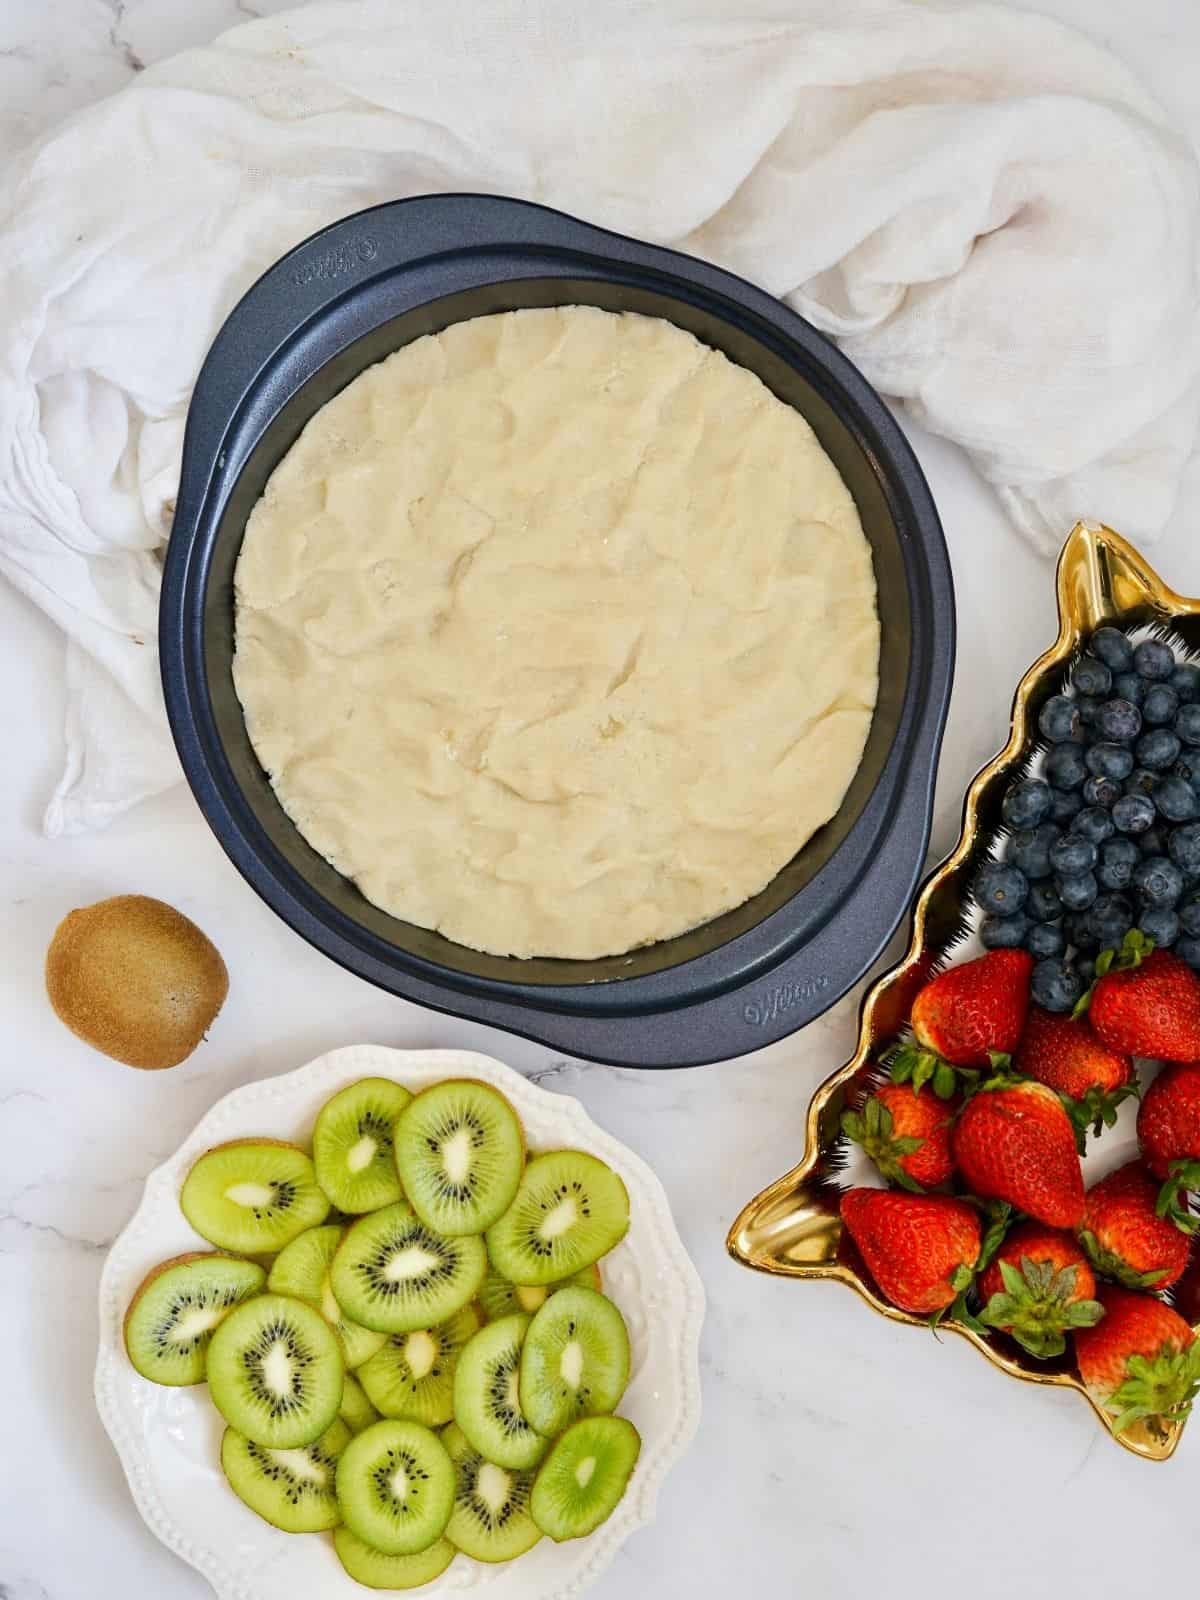 sugar cookie dough spread out in cake pan with fruit in bowl and plate nearby.